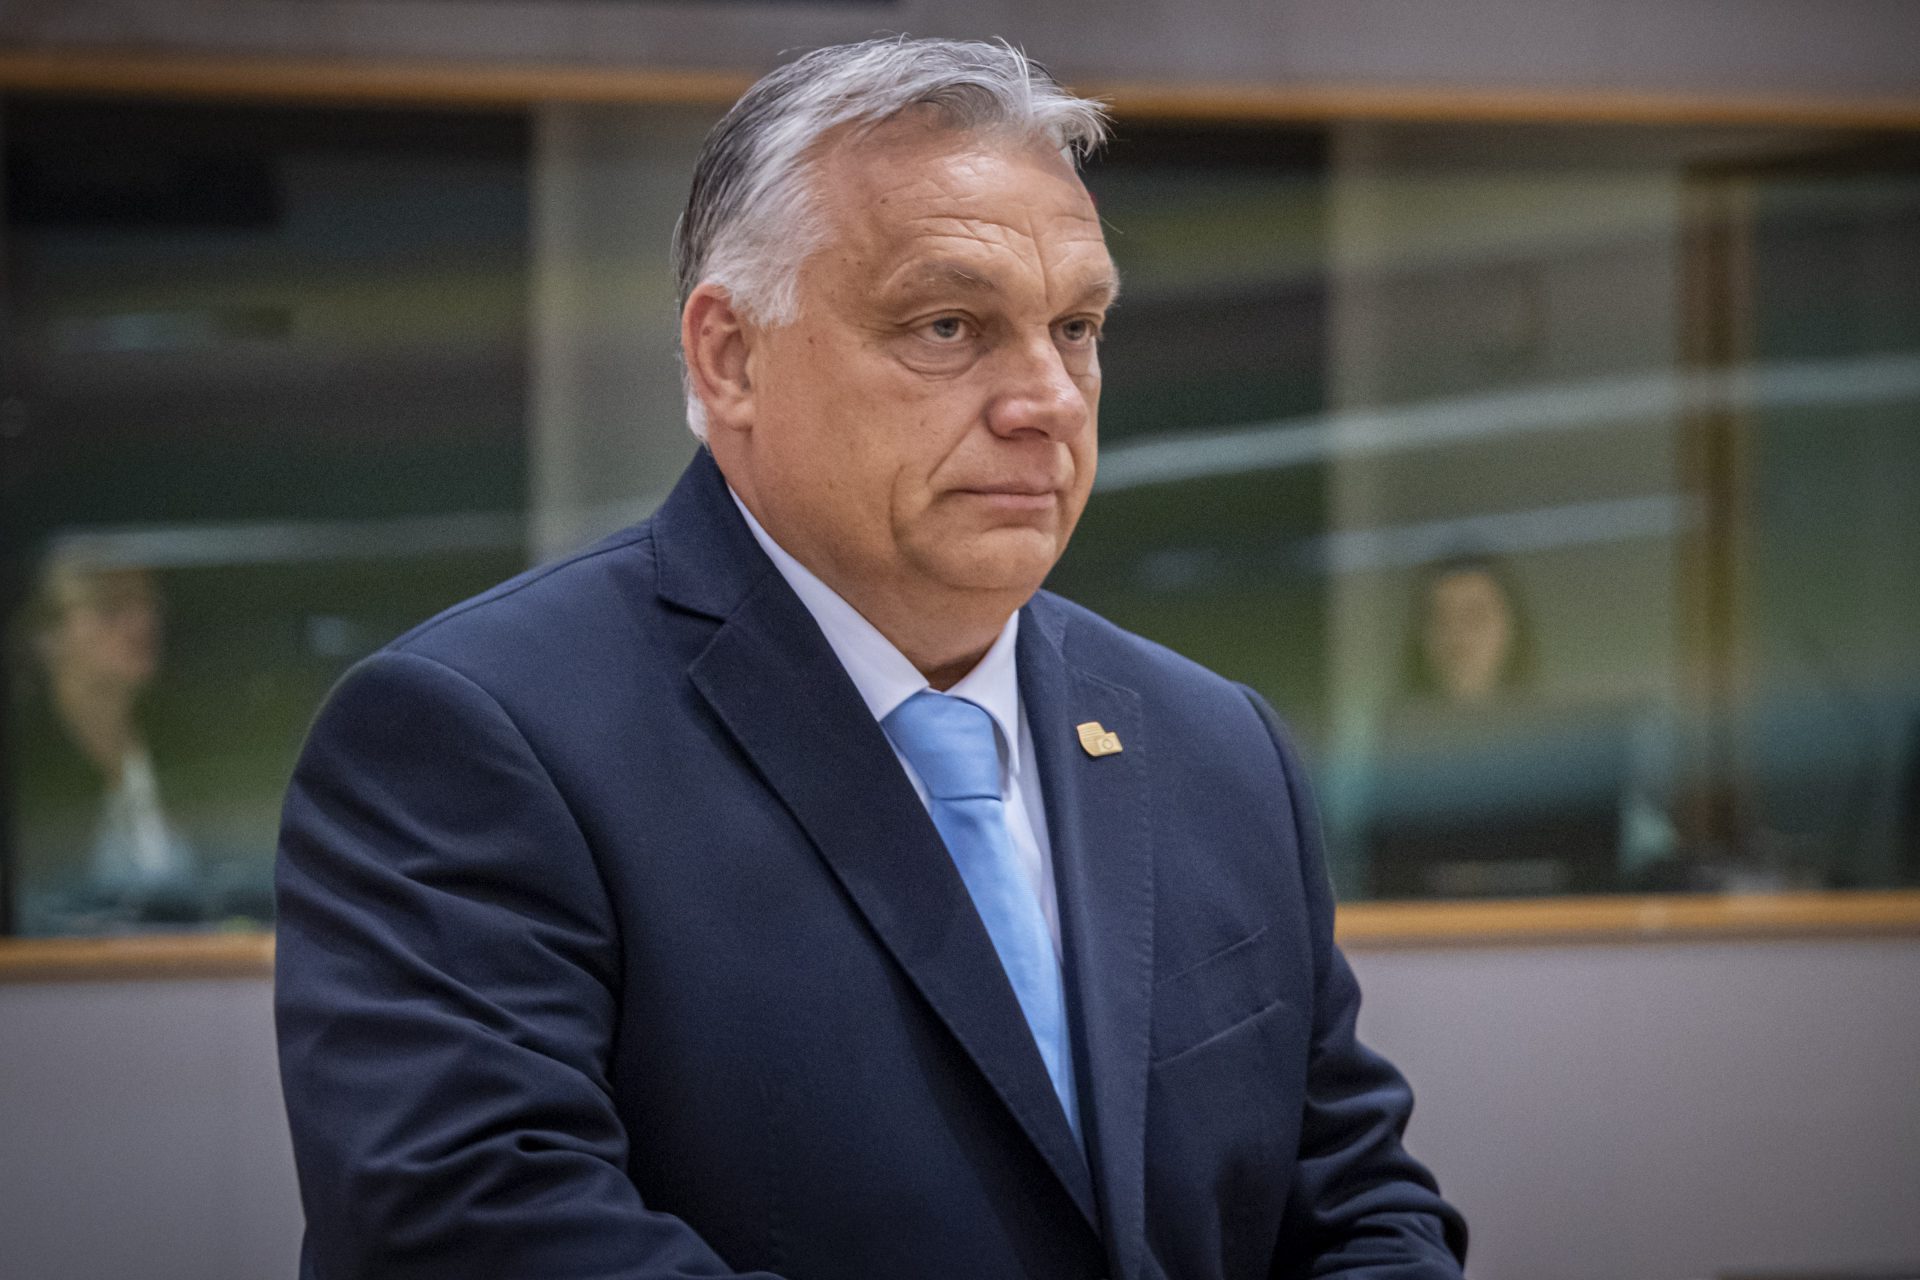 More recent problems caused by Orbán 